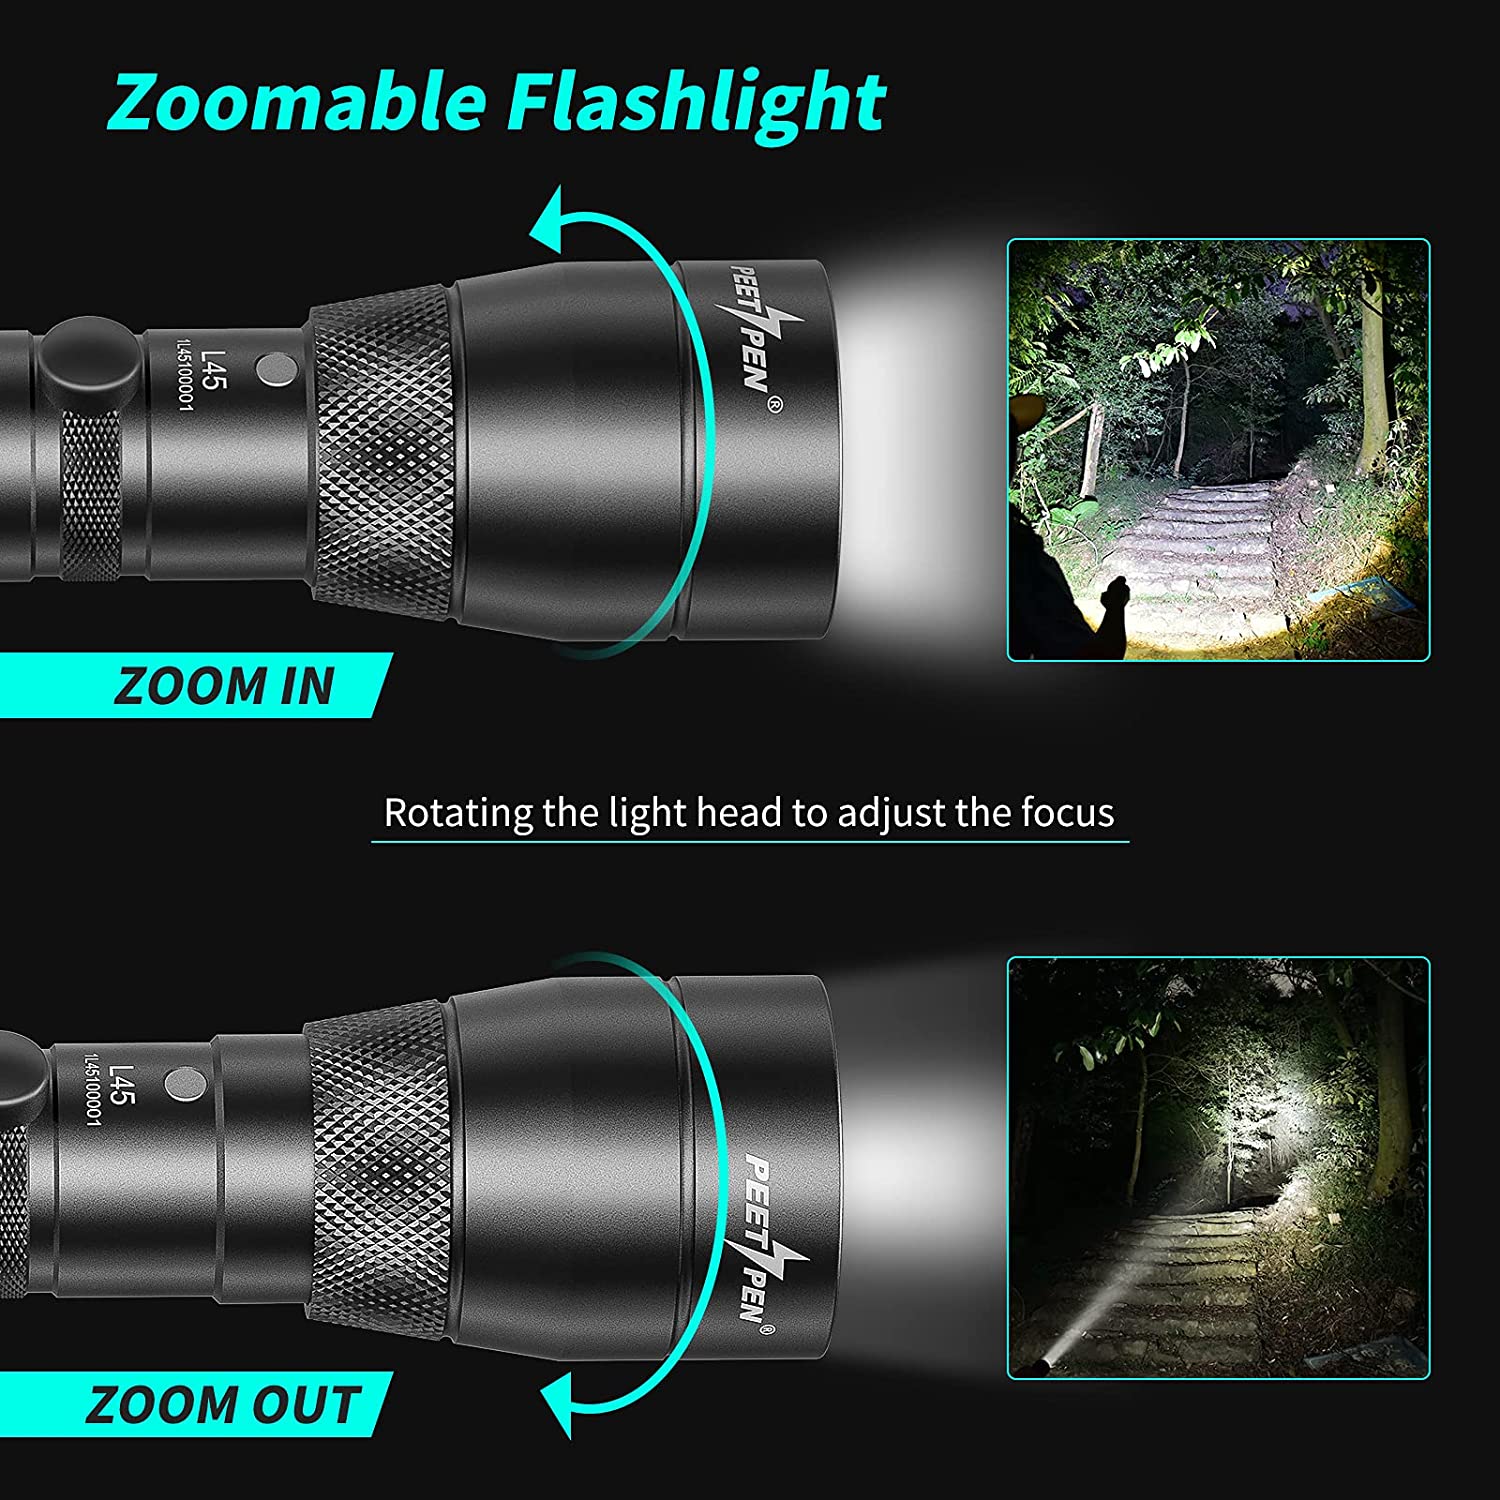 Buy-best-0.5Km-beam-Torch-PEETPEN-L45-Zoomable-USB-LED-FlashlightTorch-Rechargeable-900-lumens-IPX6-Waterproof-18650-batteryIncluded-1yr-warranty-7-products-price-in-Kenya-Lumen-Vault-products-price-in-Kenya-Lumen-Vault